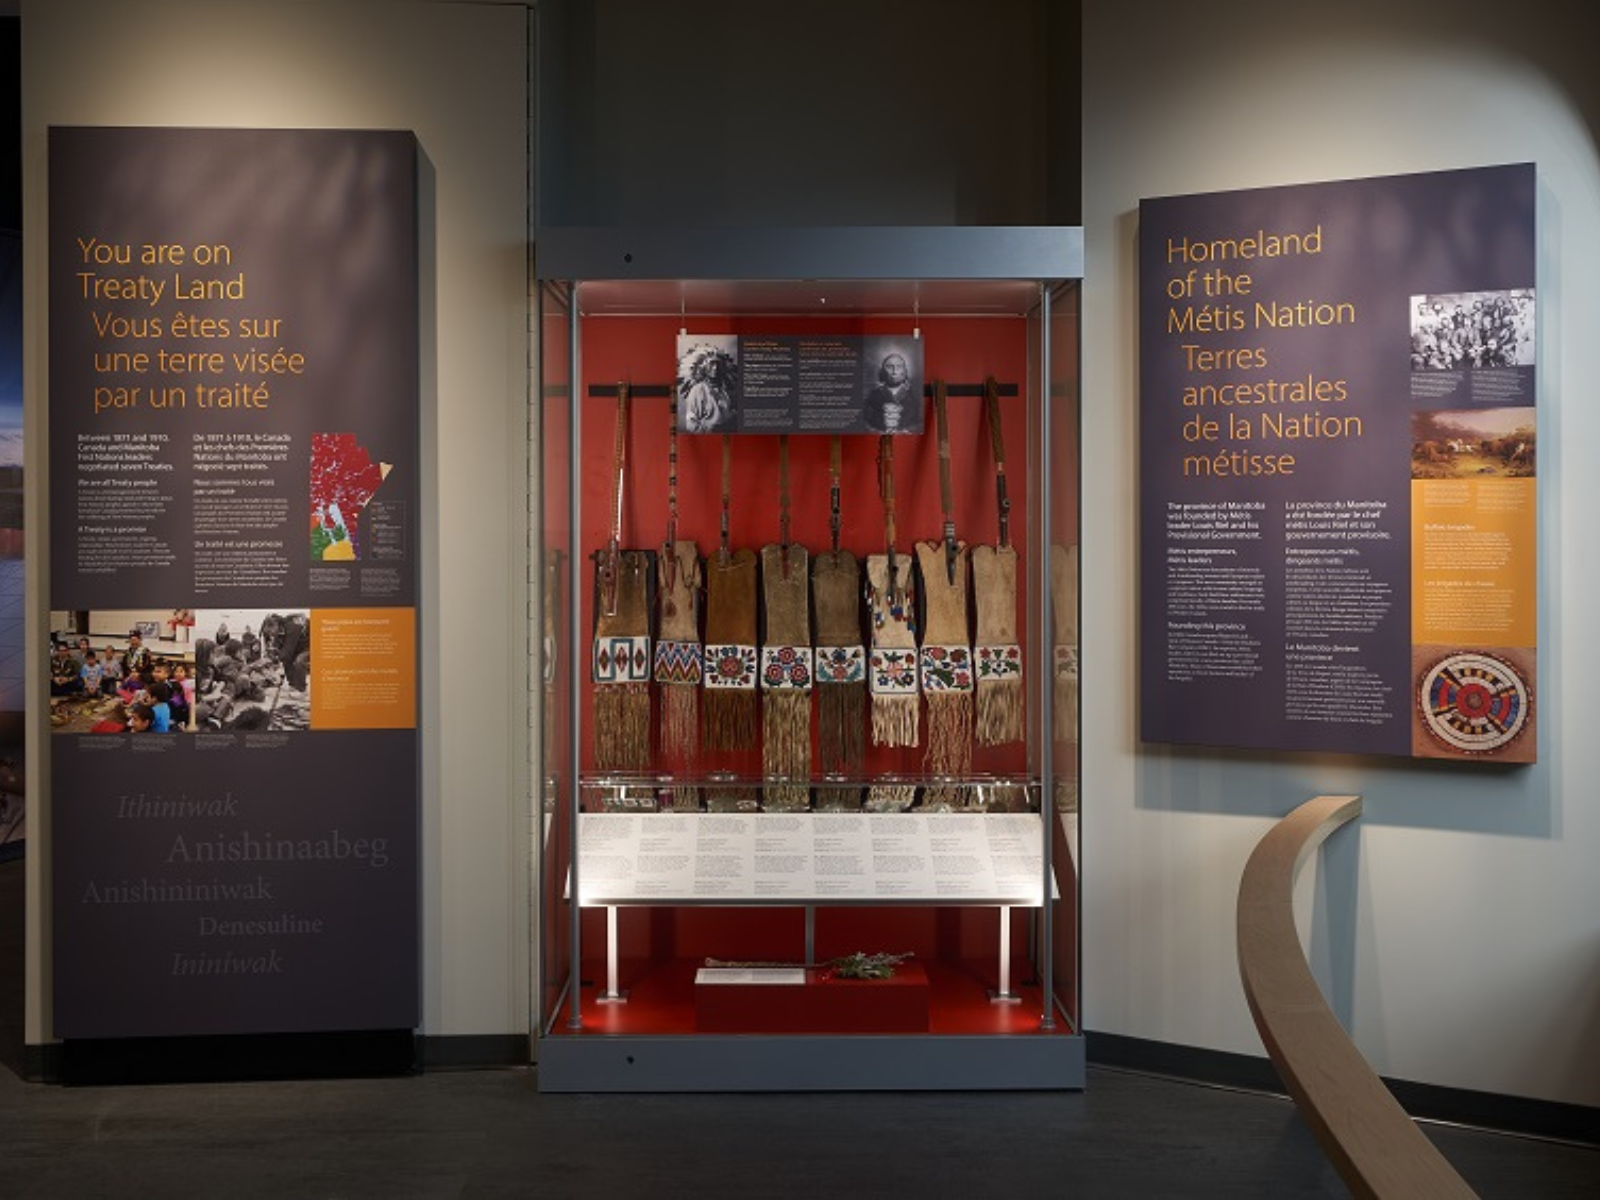 A display case with medals, pipes, and pipe bags. To the left of the case, a text panel is titled, "You are on Treaty Land", and to the right a text panel is titled, "Homeland of the Metis Nation".